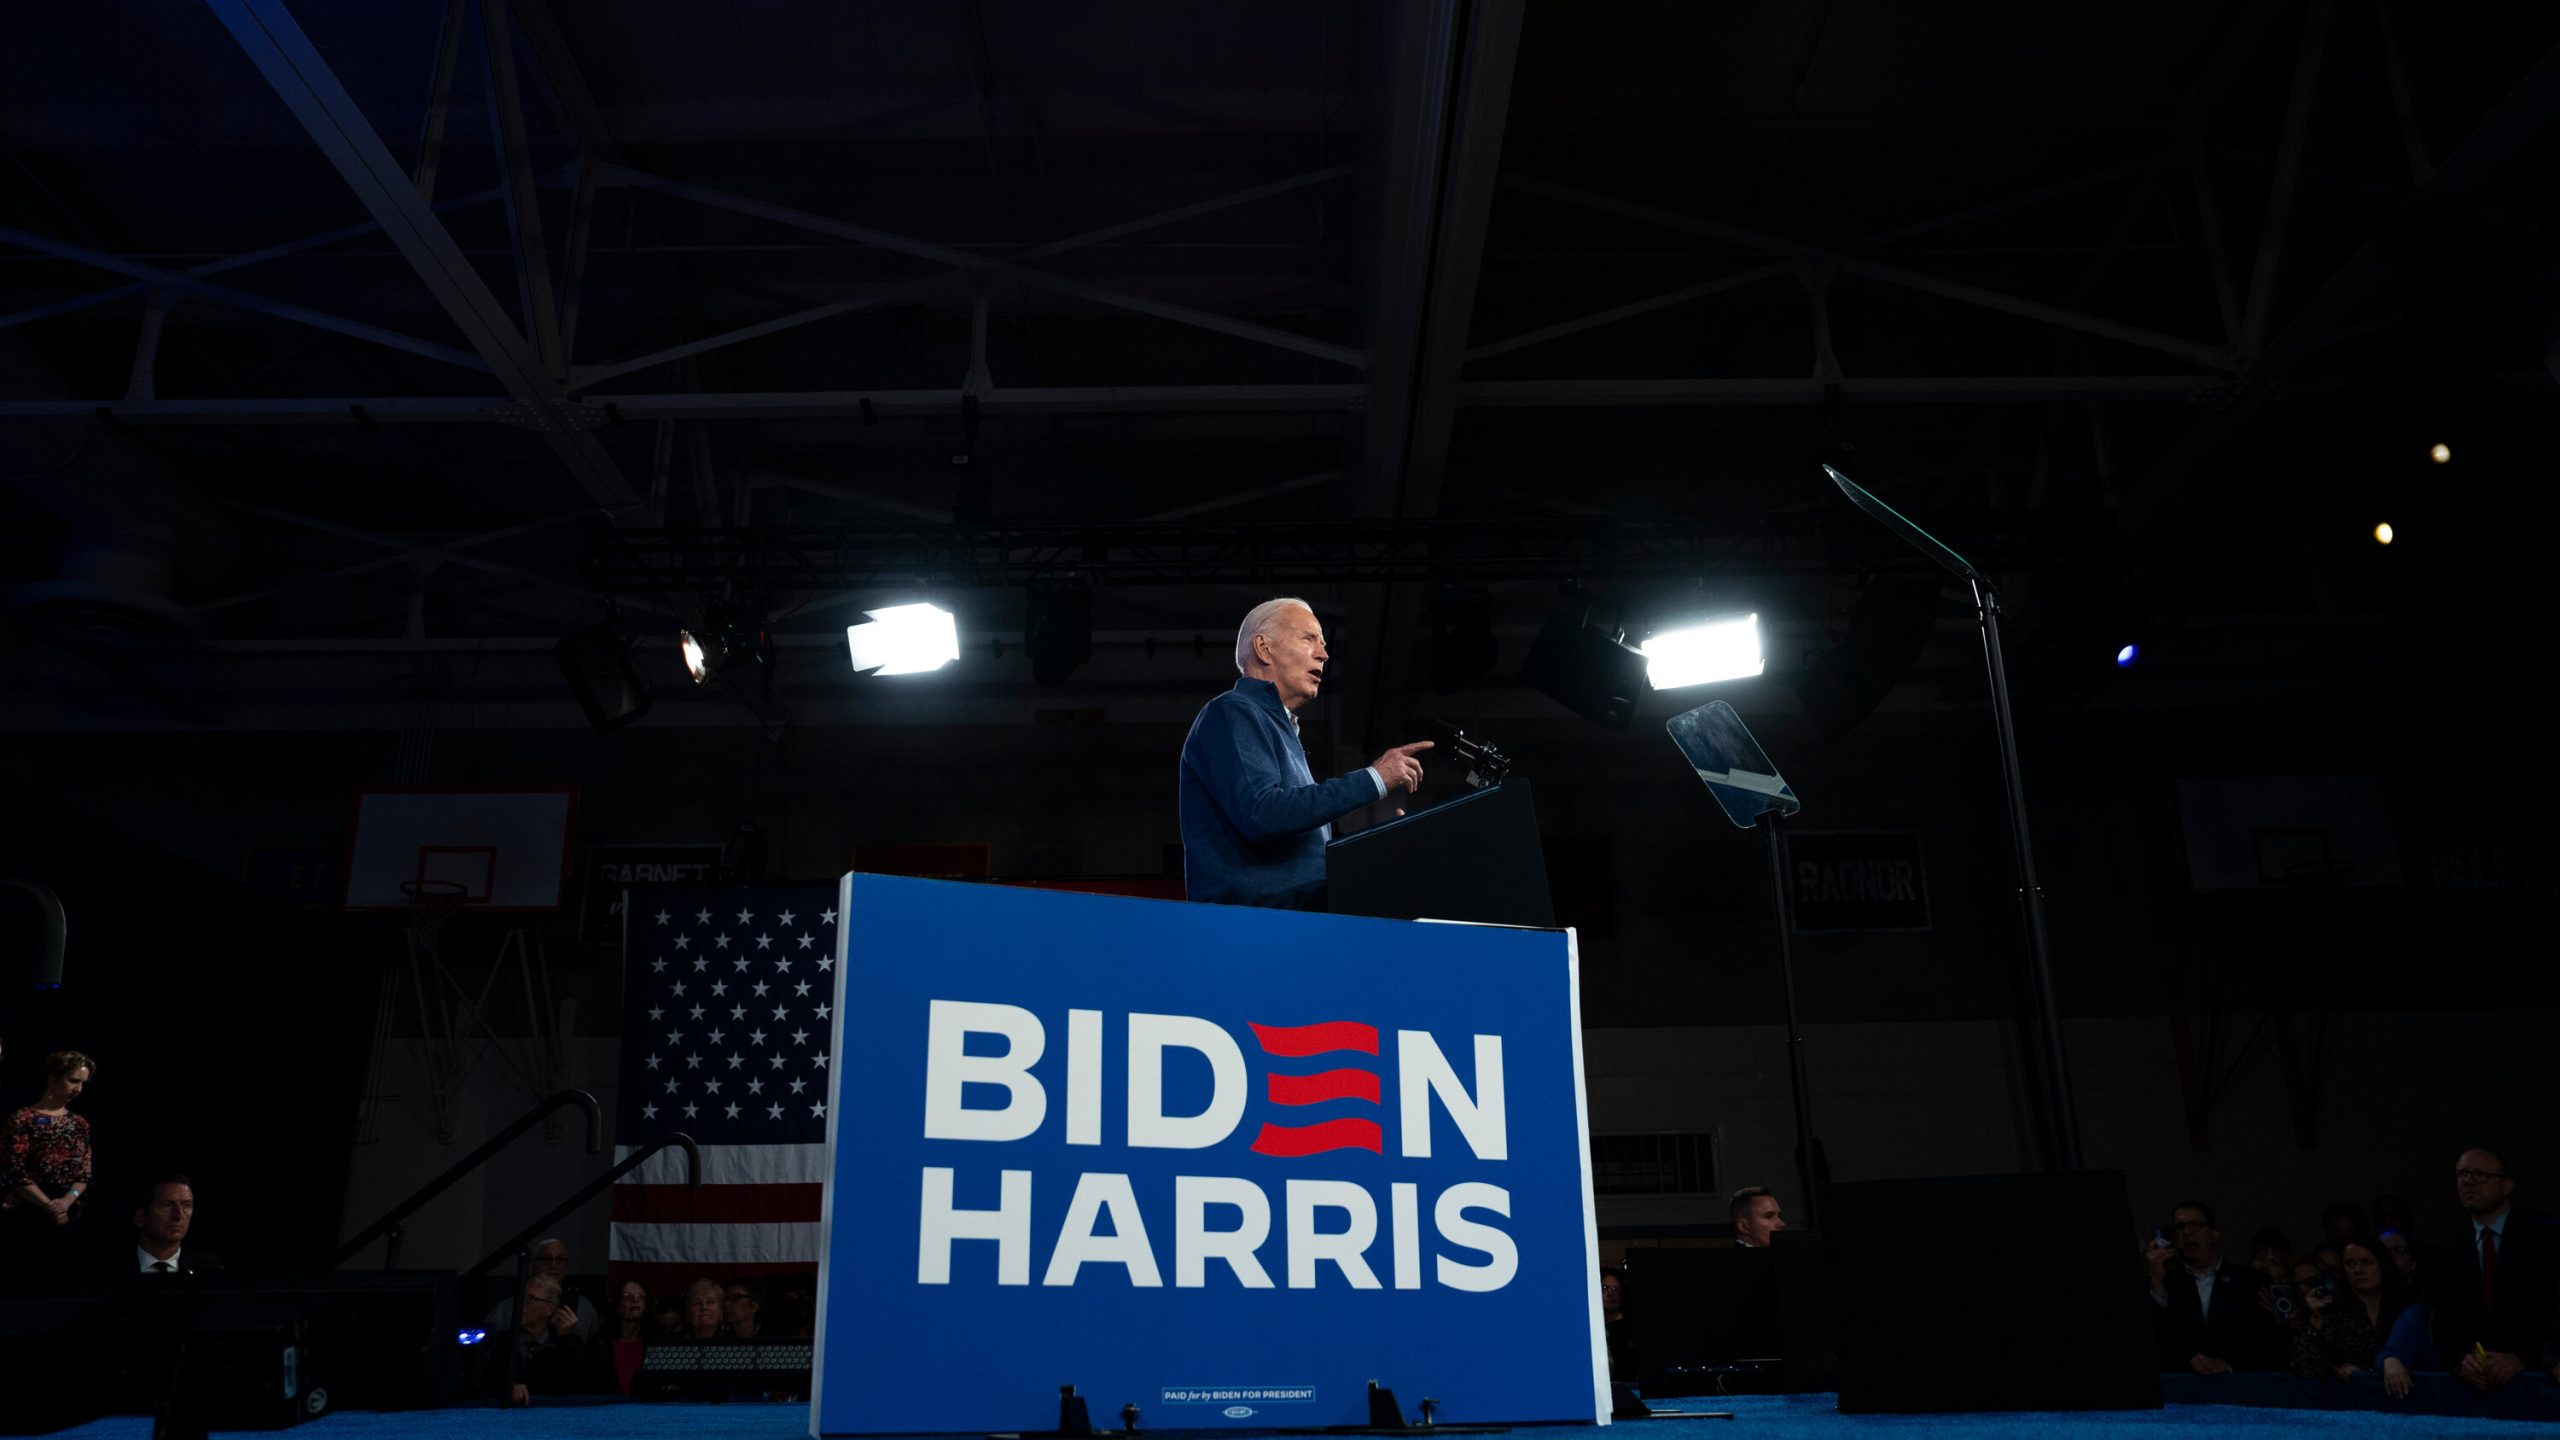 Biden faces scrutiny over verbal blunders despite autocue use (Credits: The NY Times)